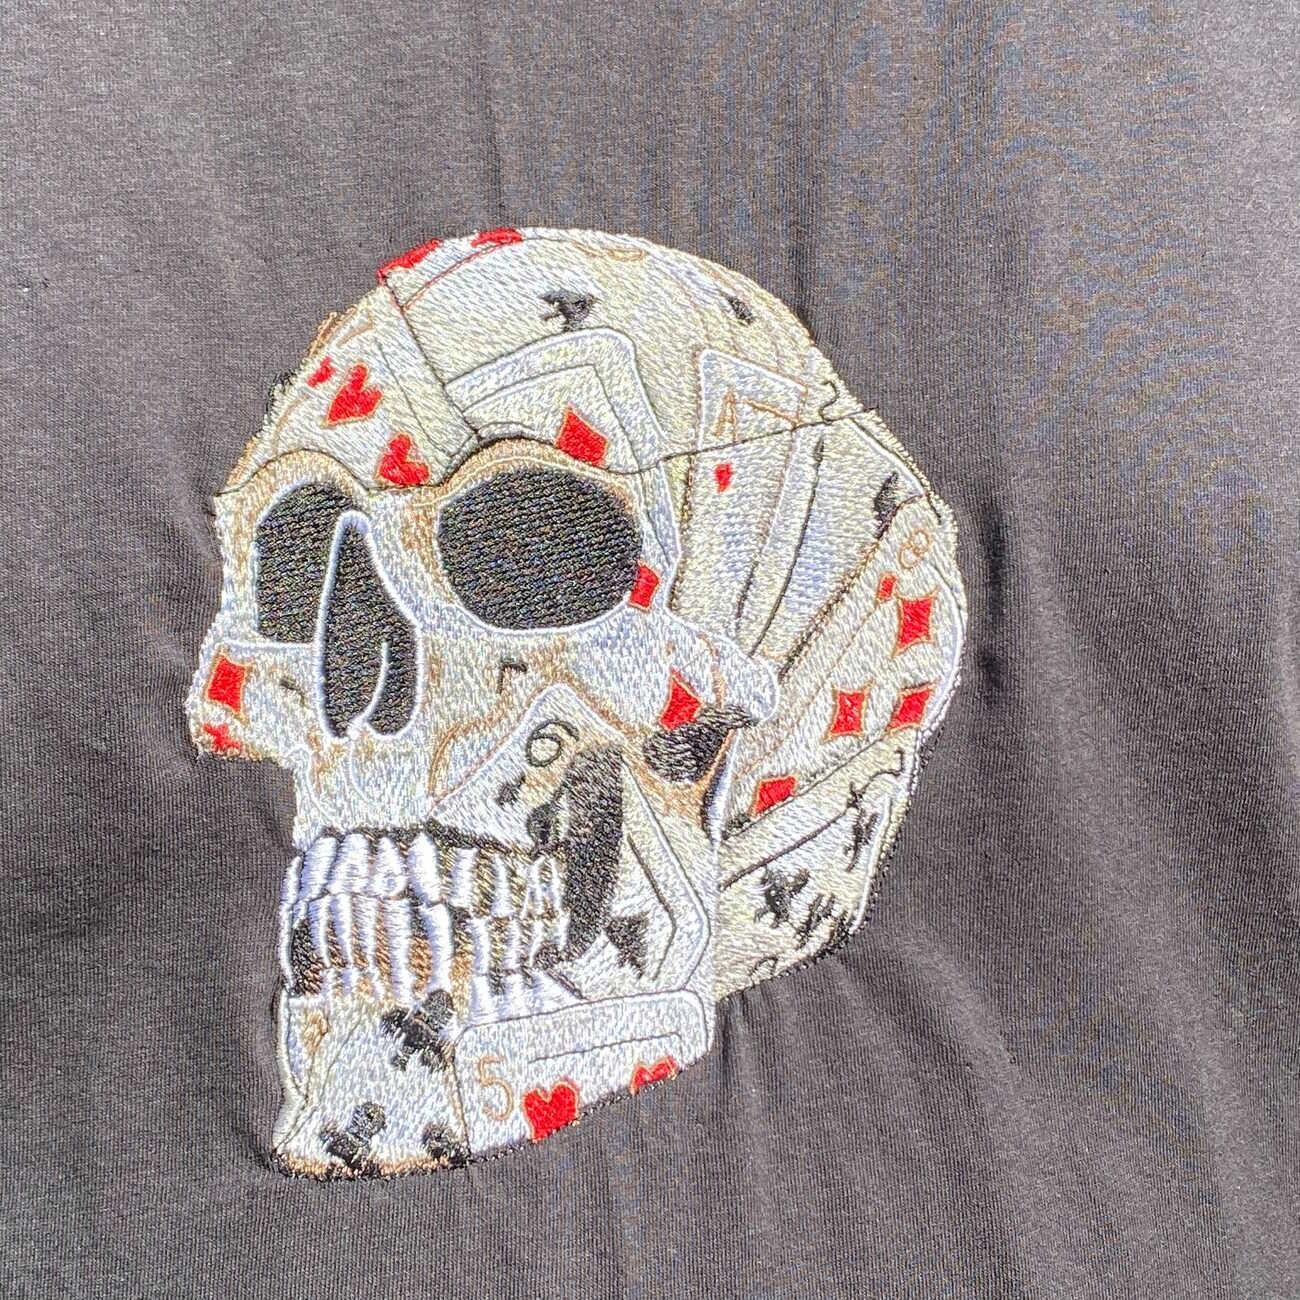 Skull Machine Embroidery Design: Embrace Your Edgy Style